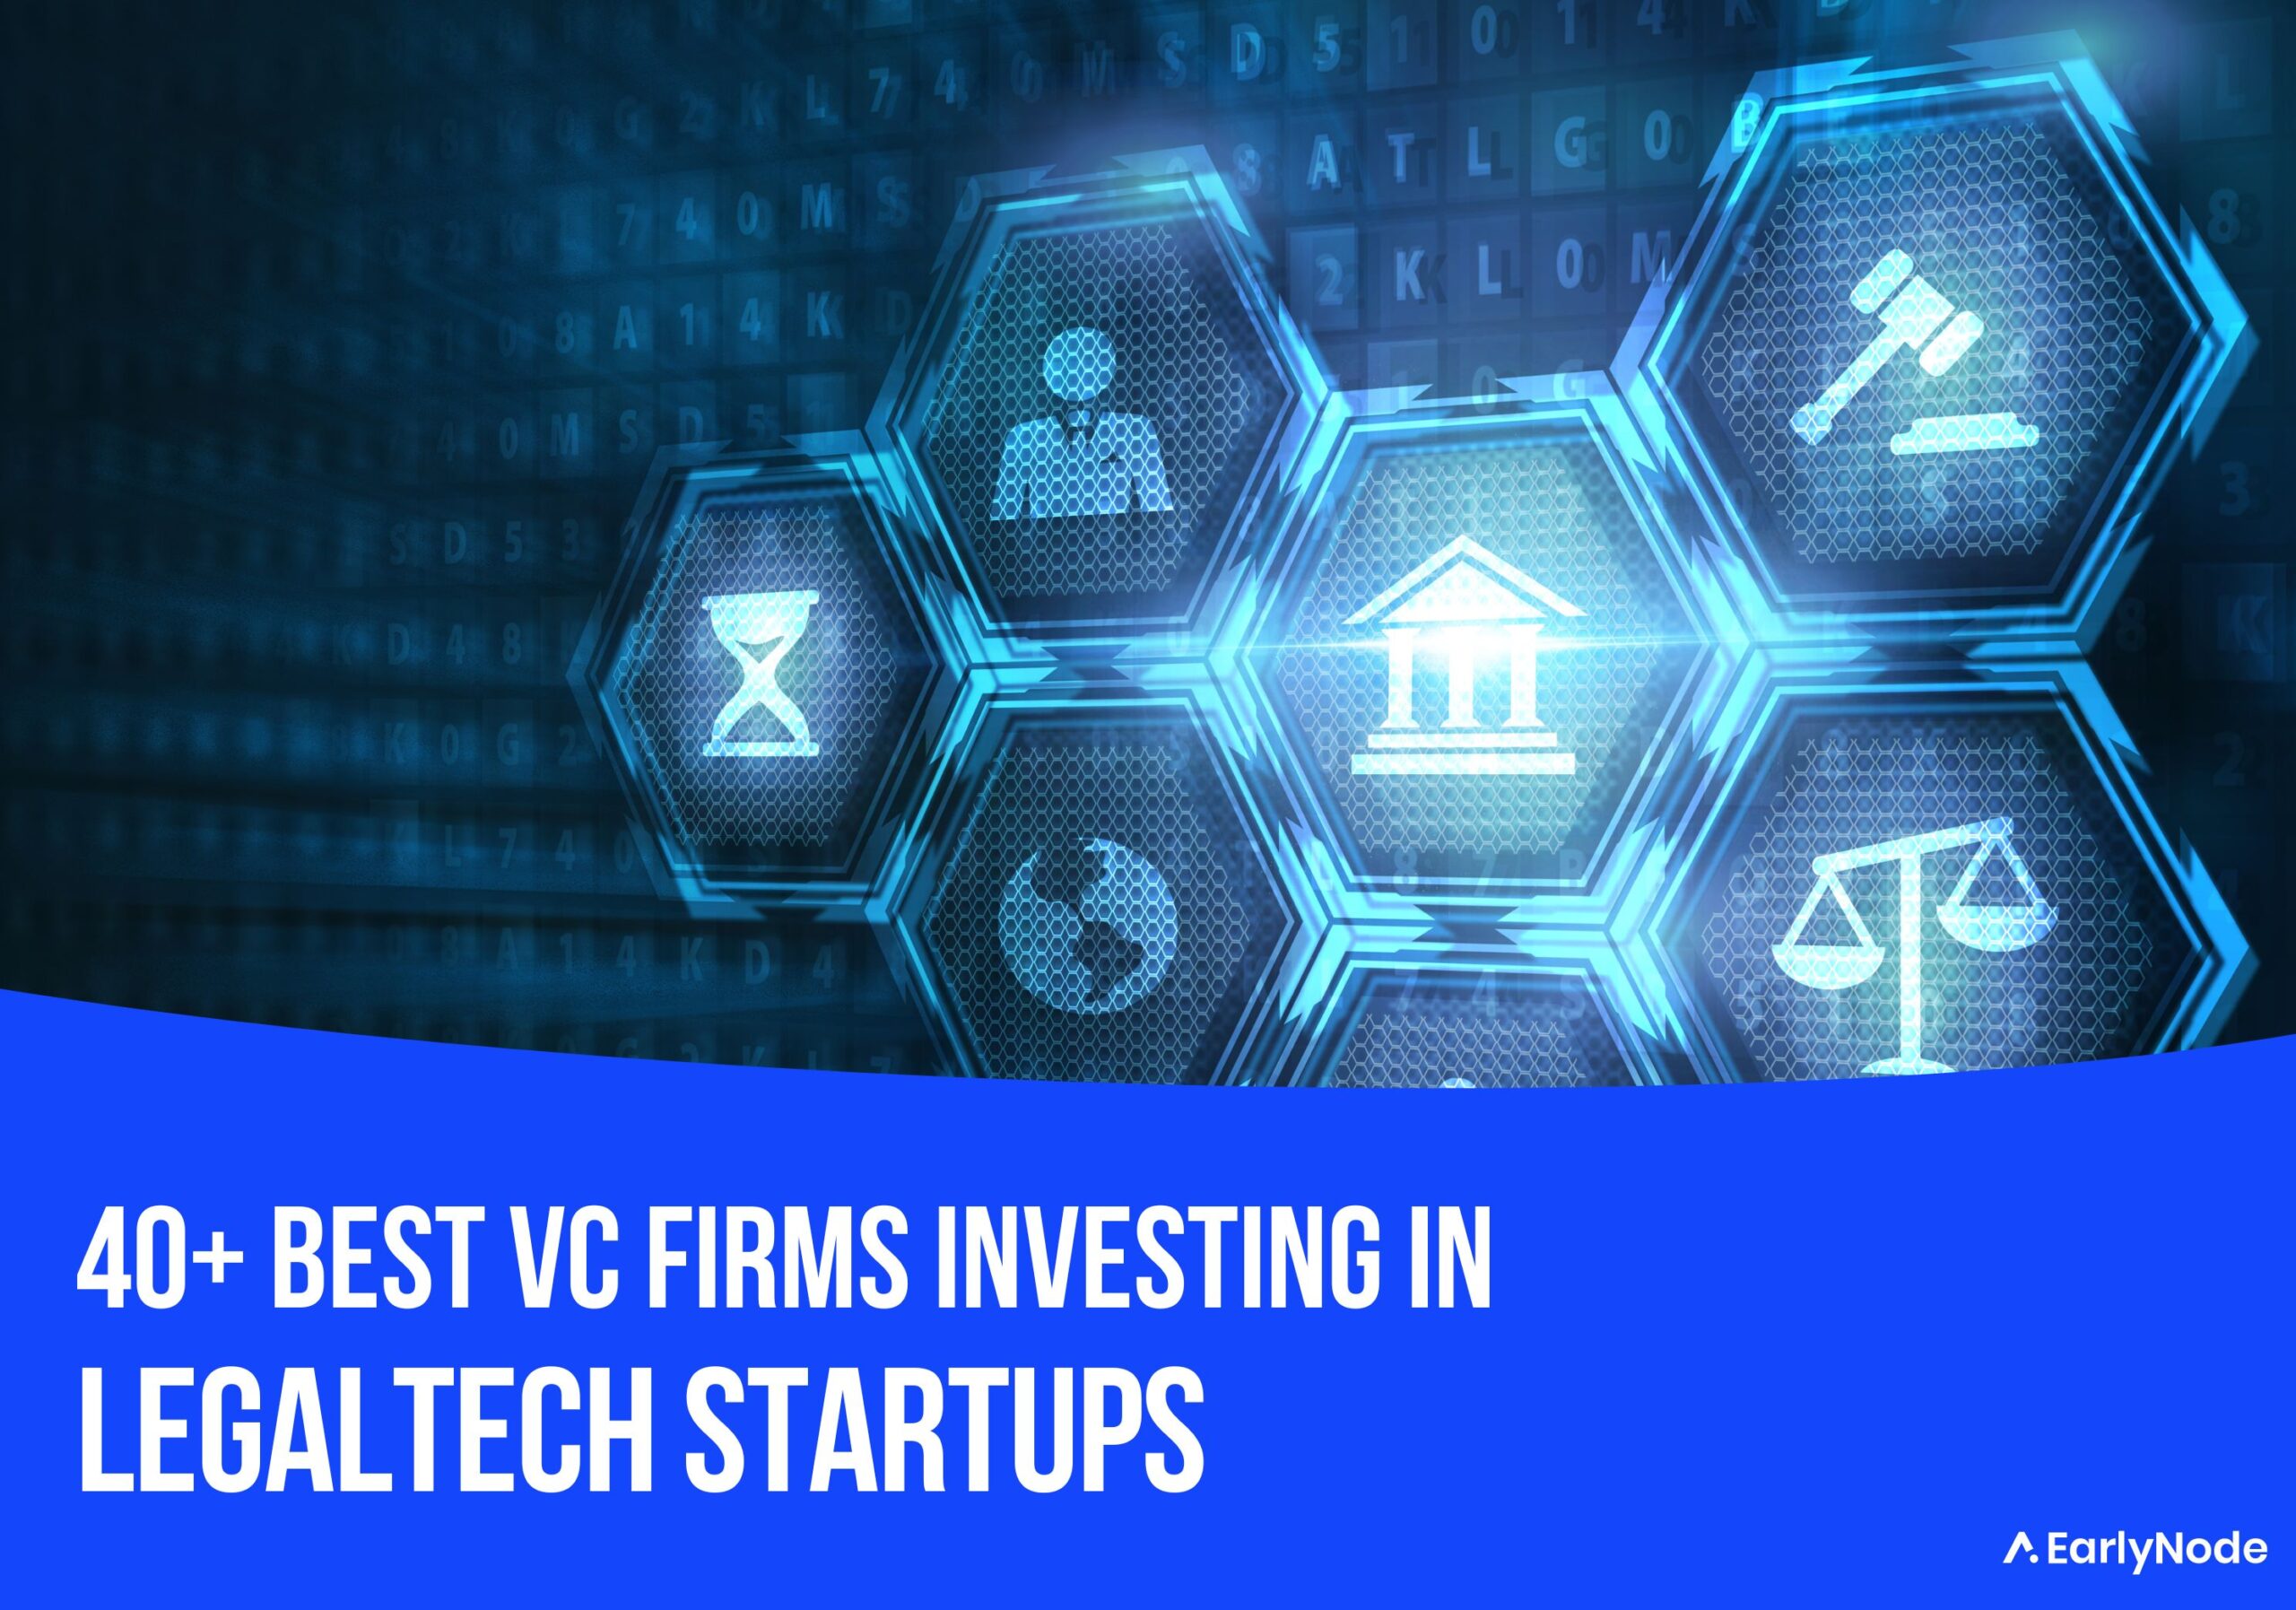 40+ Best Venture Capital (VC) Firms Investing in Legaltech Startups